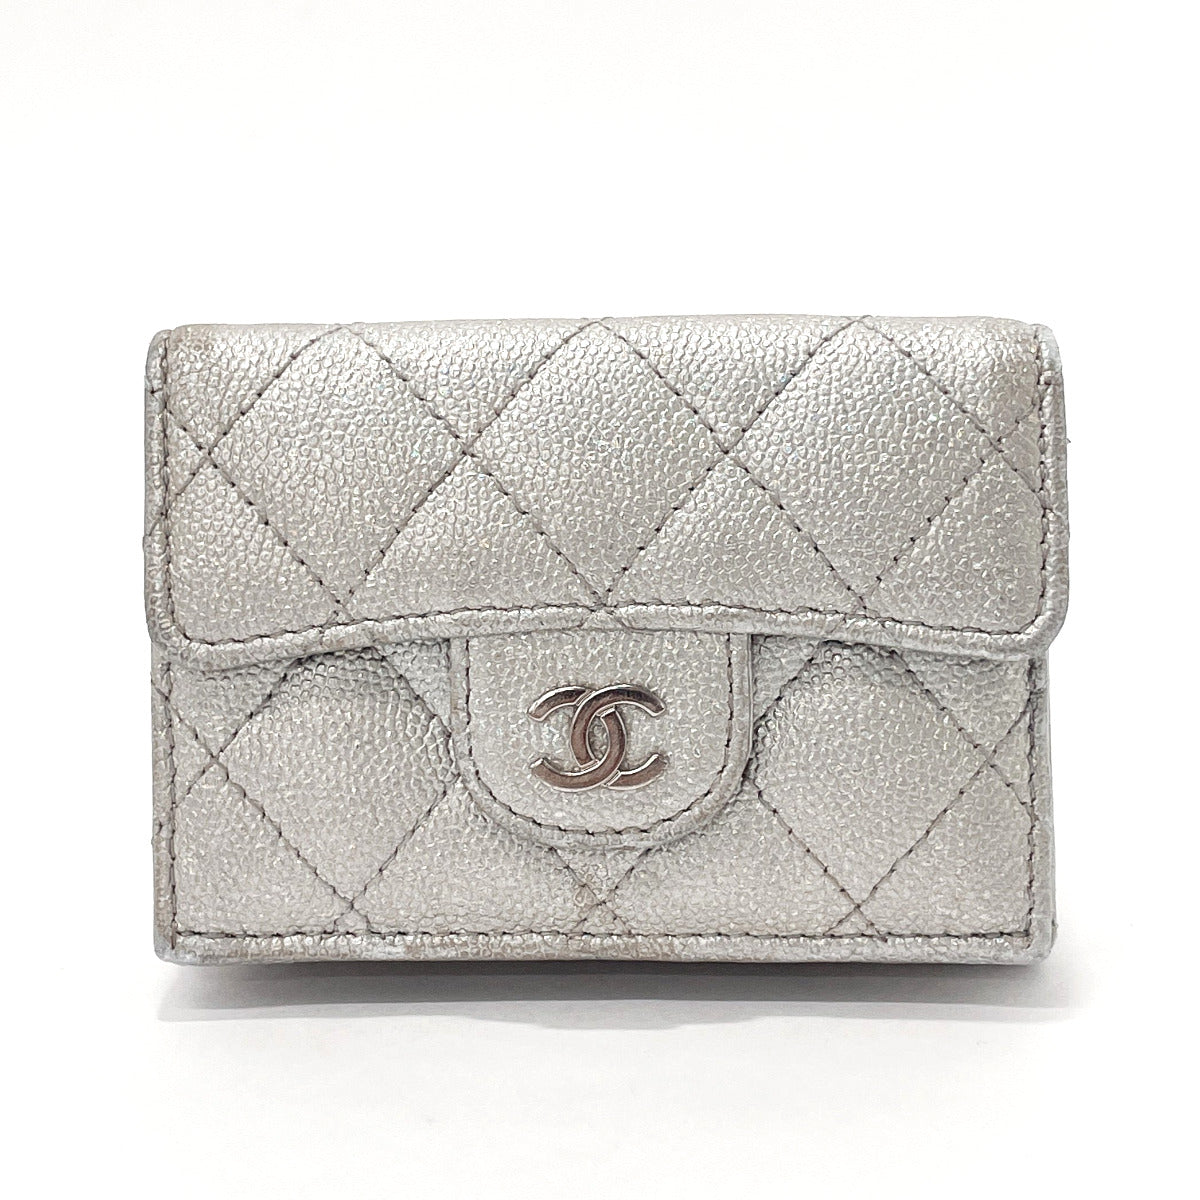 Chanel Wallet Large Gusset Flap Metallic Gold Quilted Lambskin Added Chain  B481